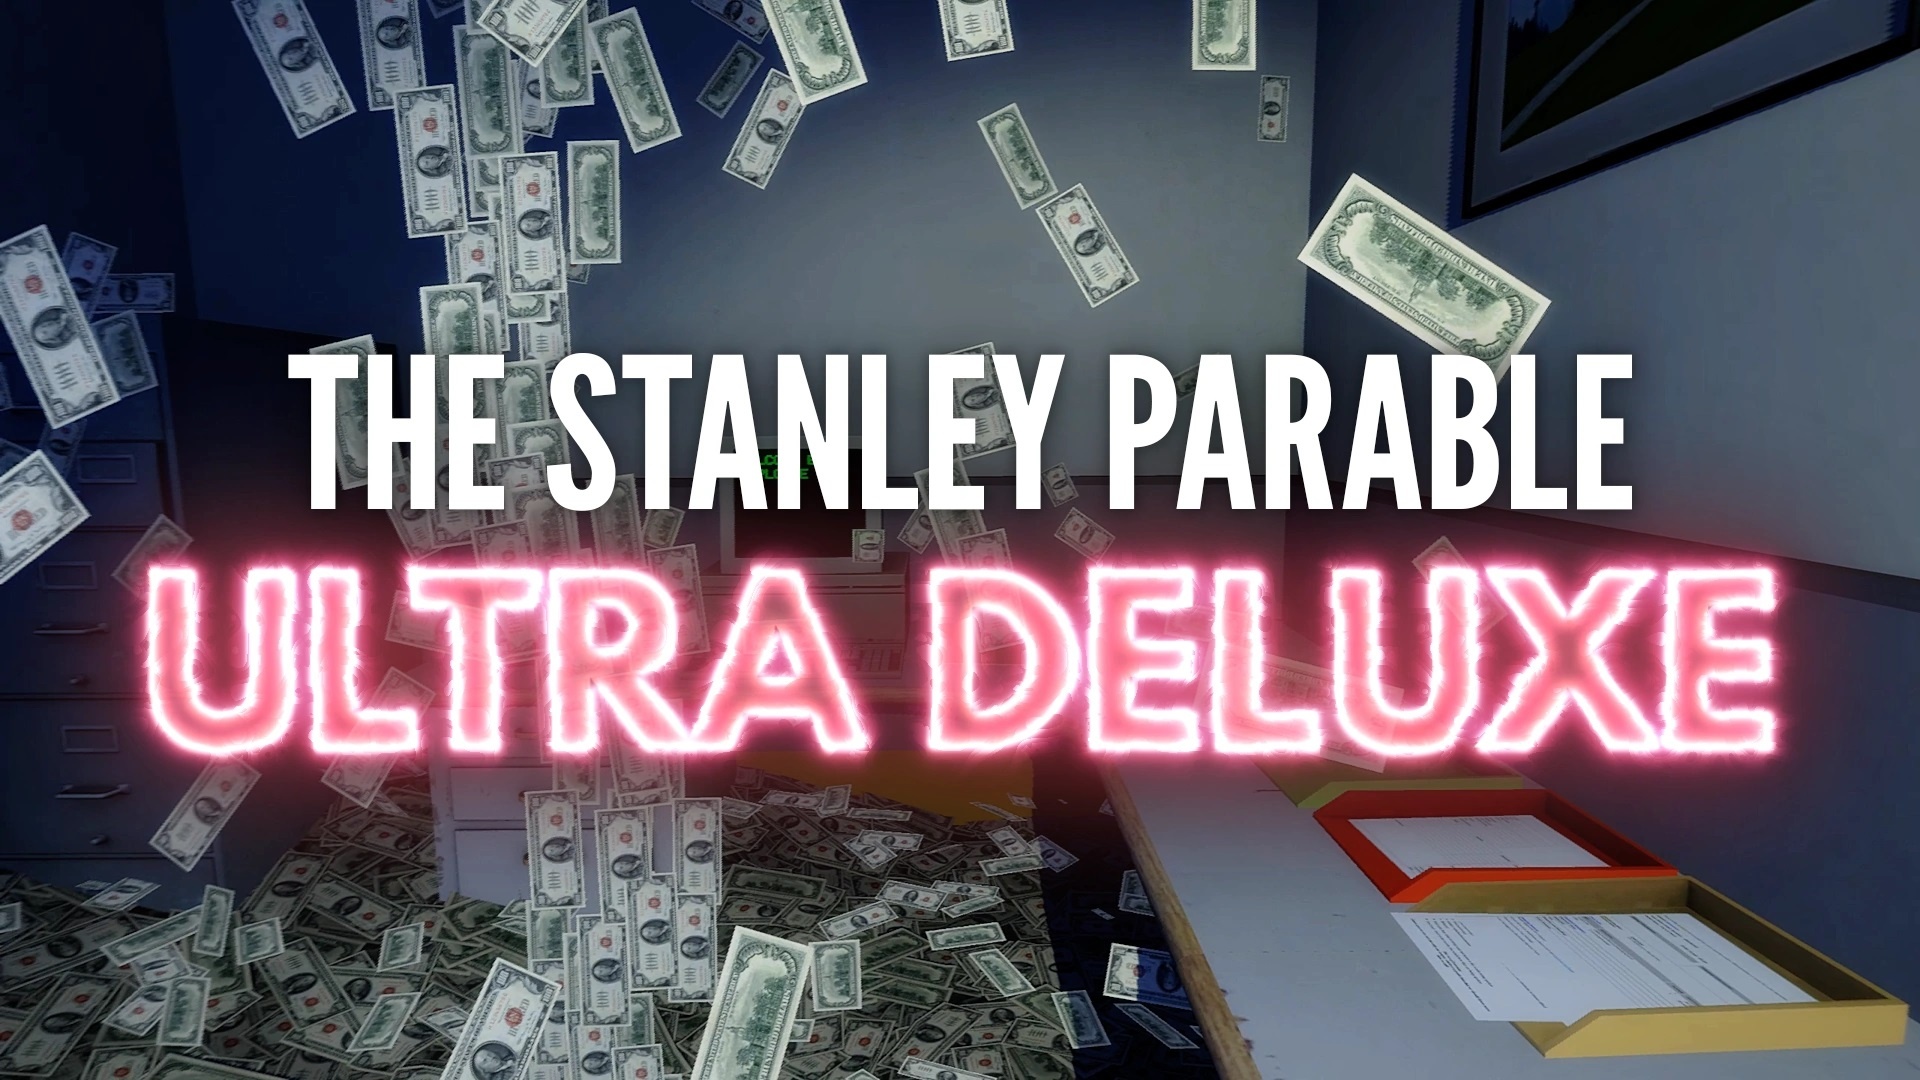 The Stanley Parable Ultra Deluxe: Kevan Brighting reprised his role as the Narrator. 1920x1080 Full HD Wallpaper.